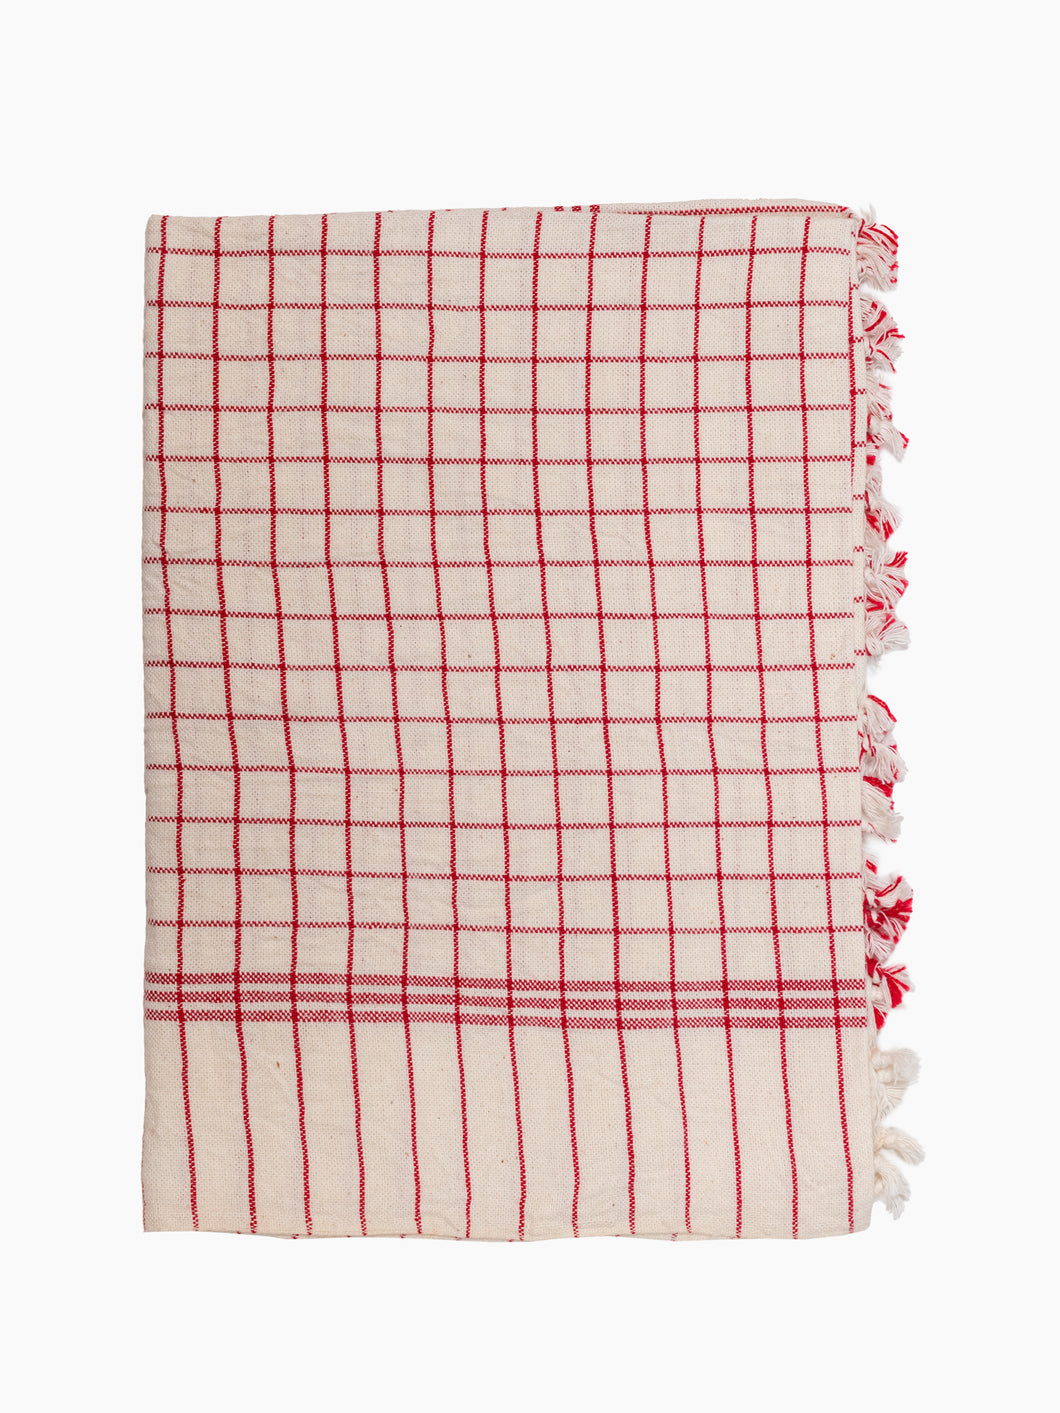 Red French Lattice Kitchen Towel